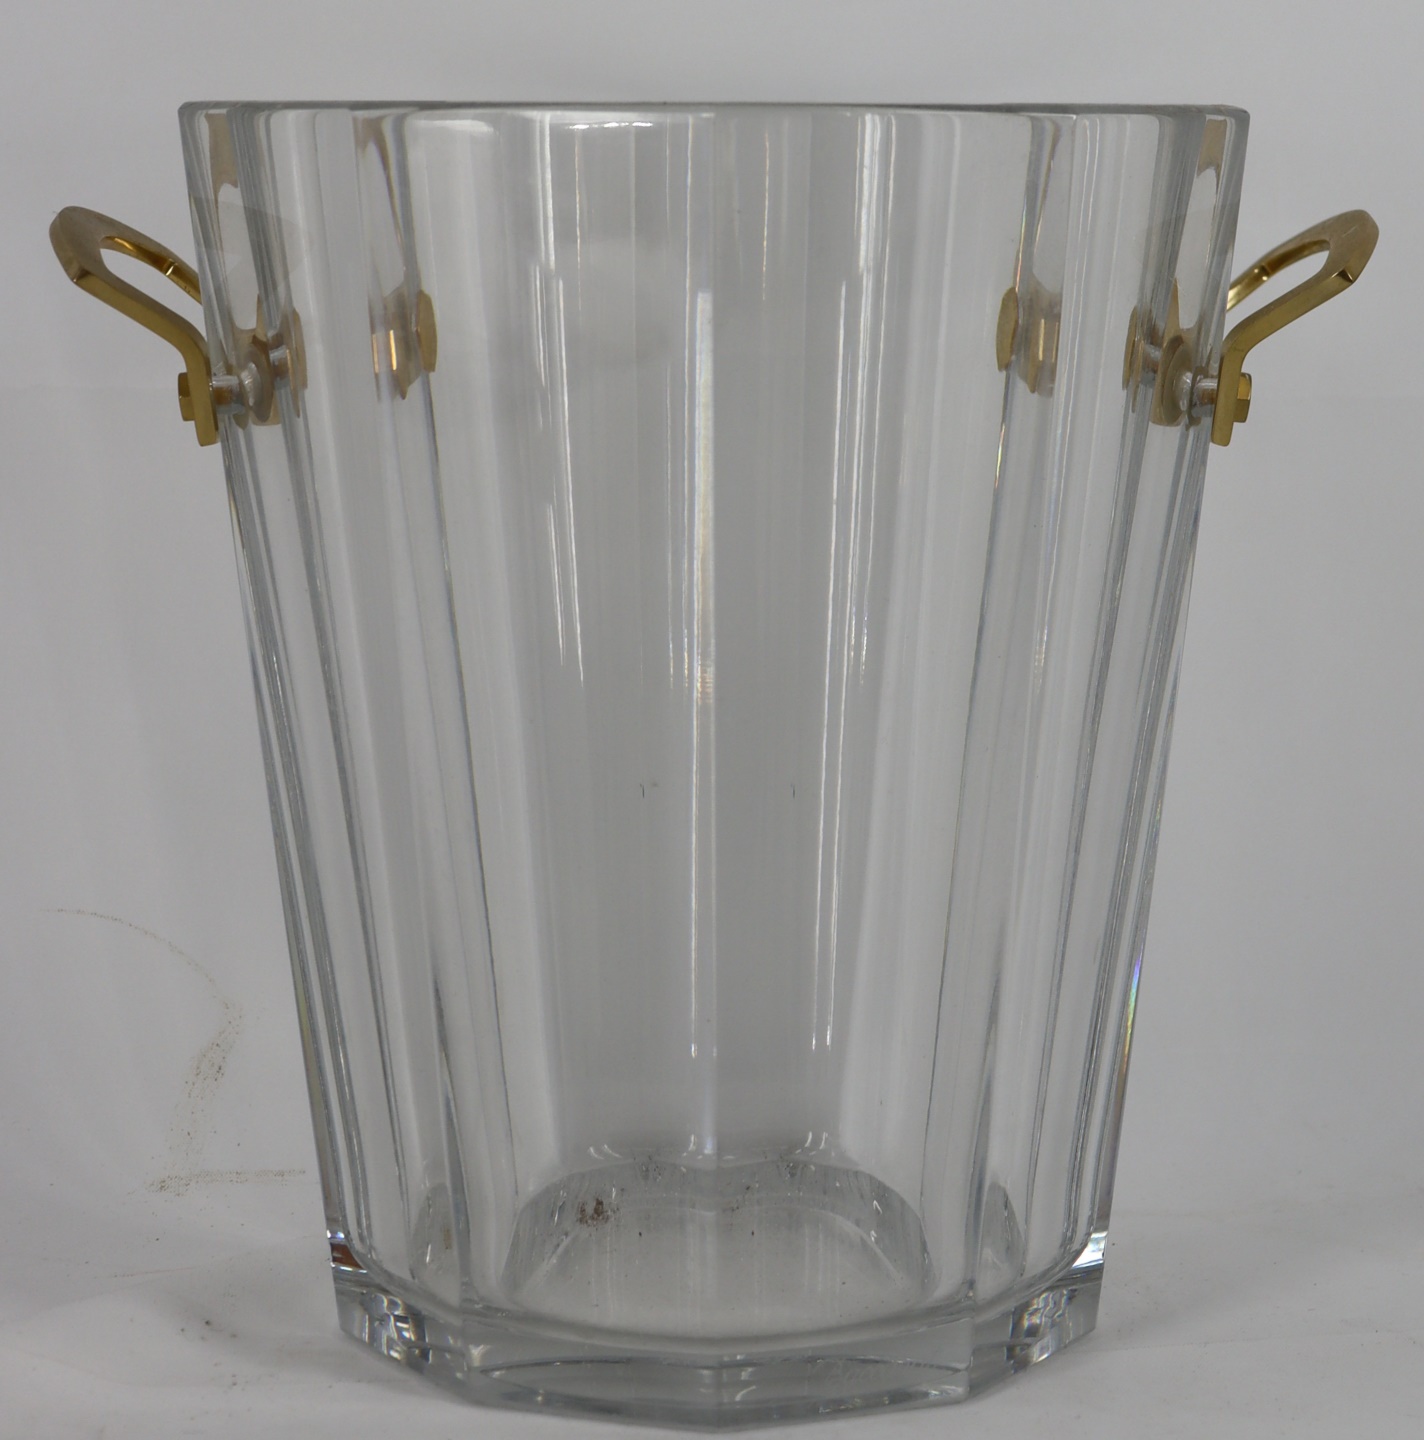 BACCARAT GLASS ICE BUCKET WITH